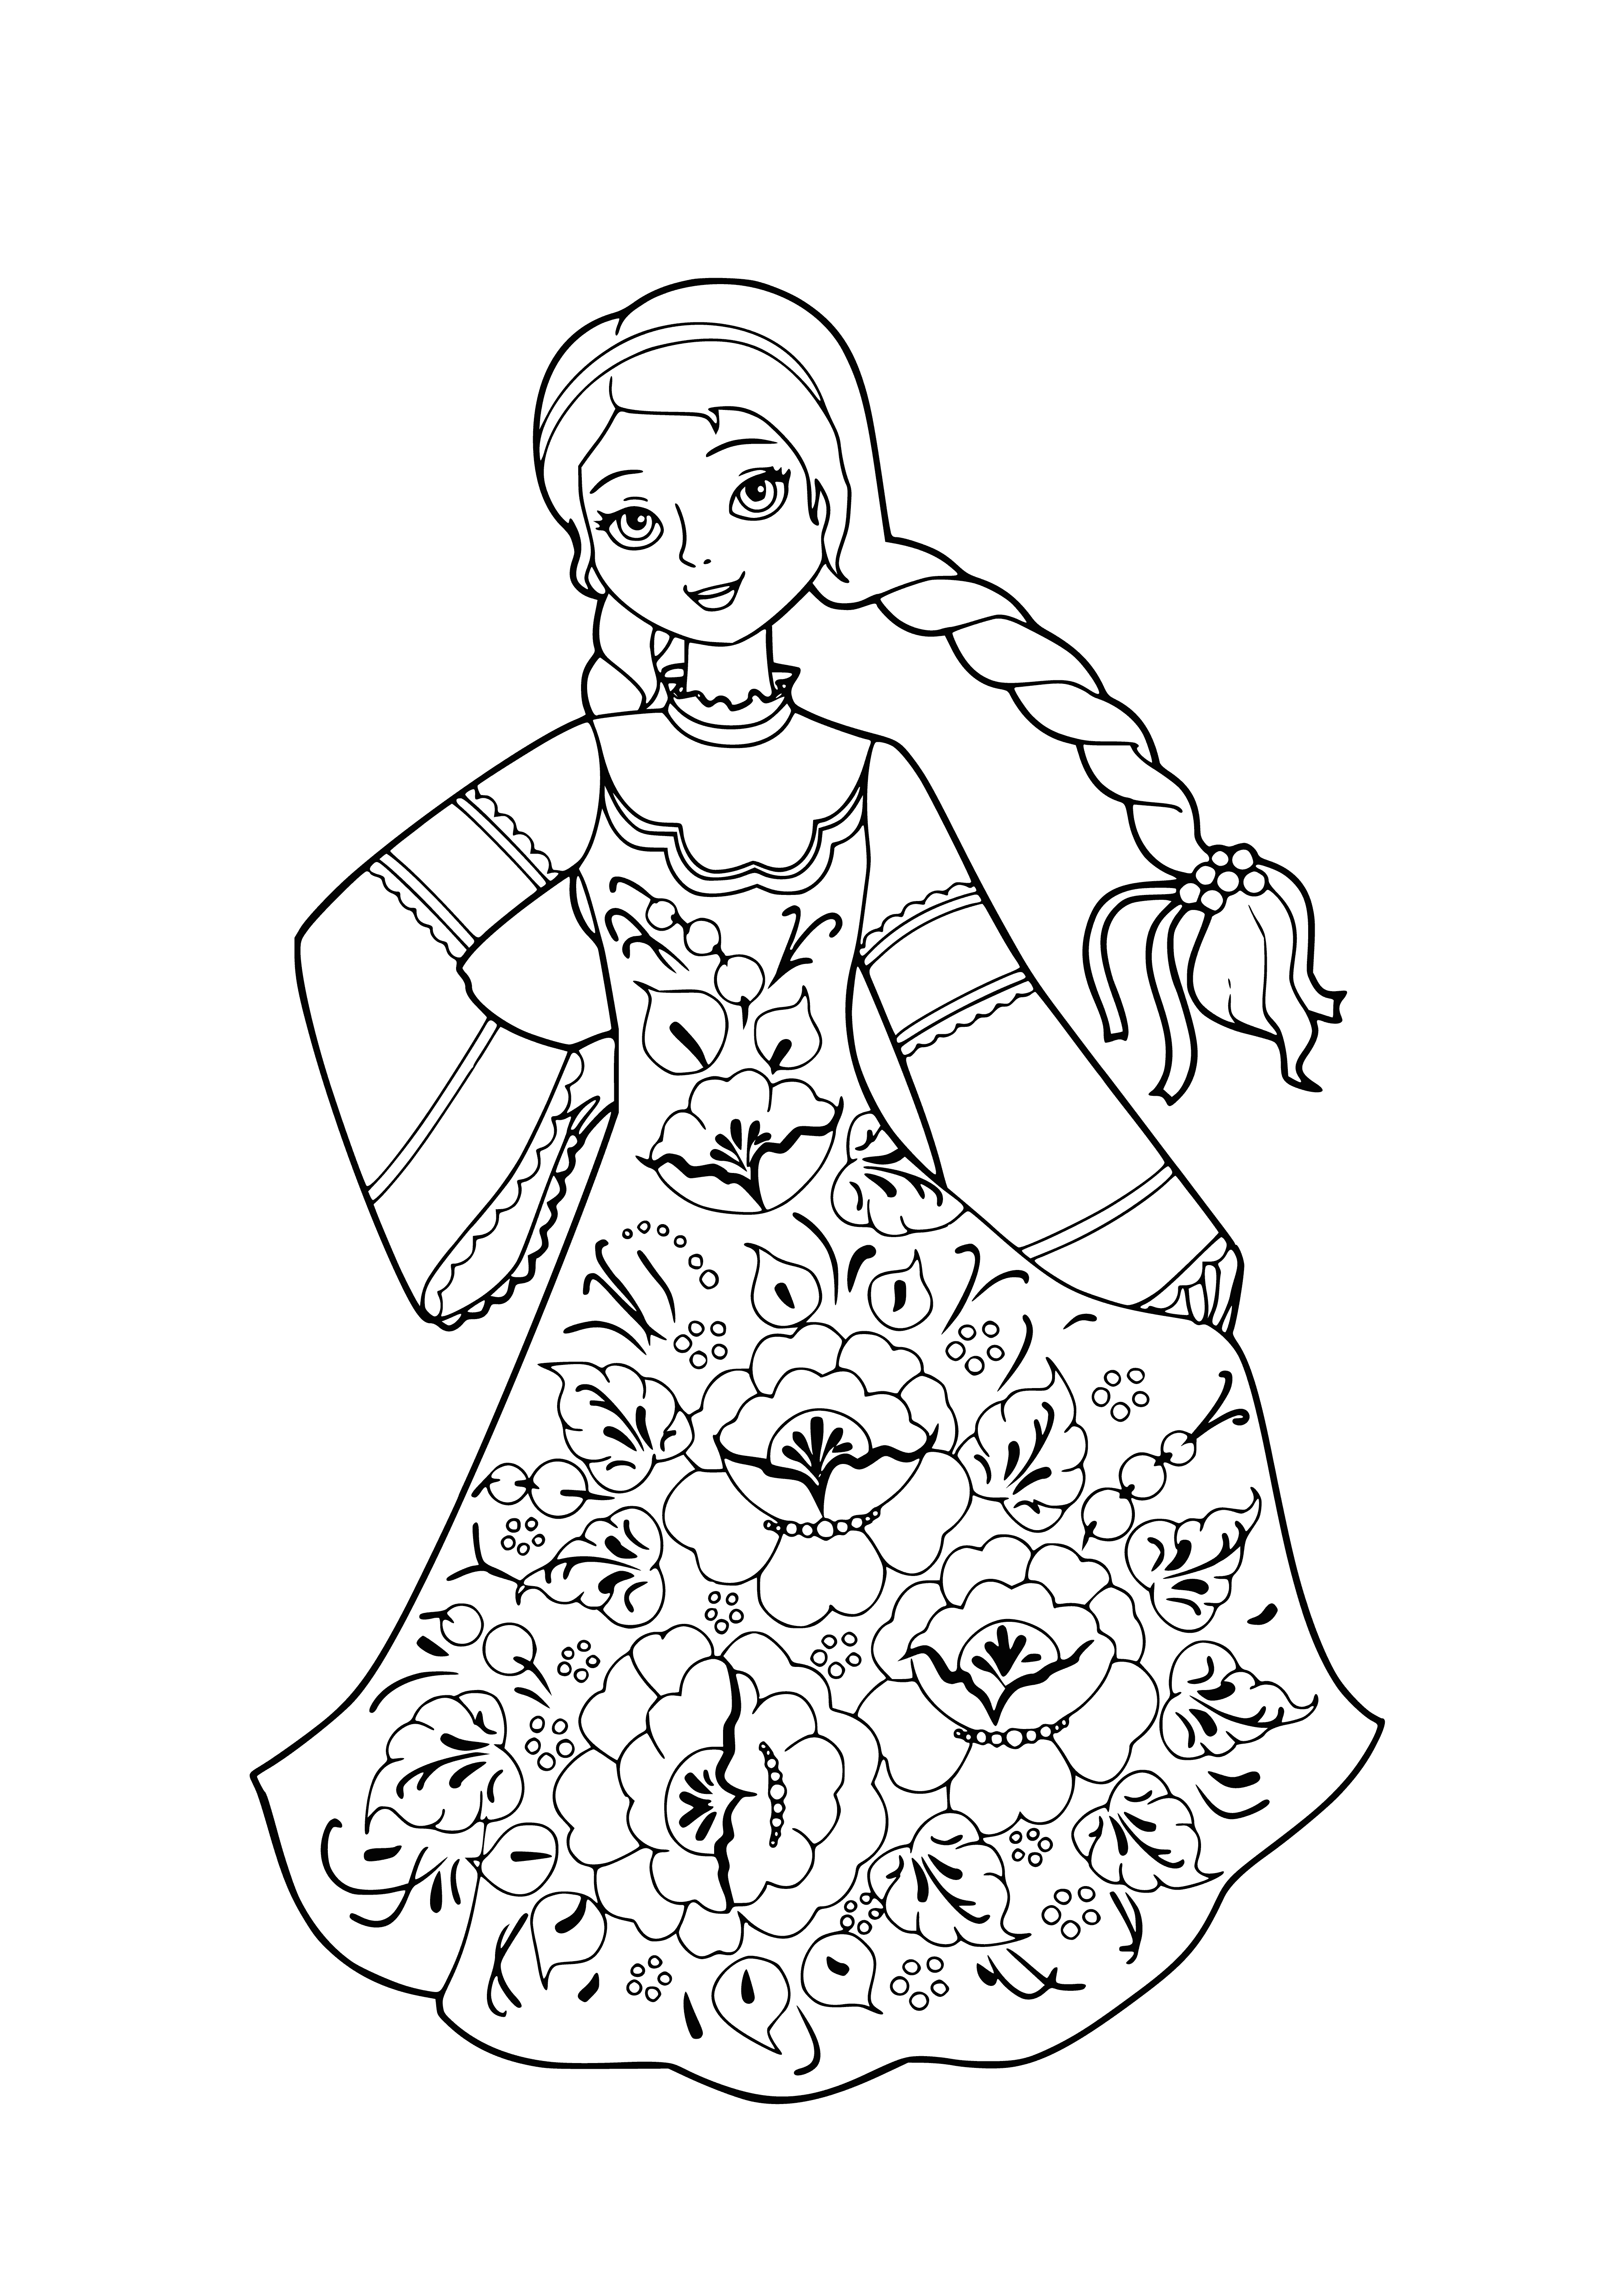 coloring page: Three Russian beauties in white dresses with black designs, each with unique look: veiled woman w/ long train, woman with umbrella, and woman with small cat.